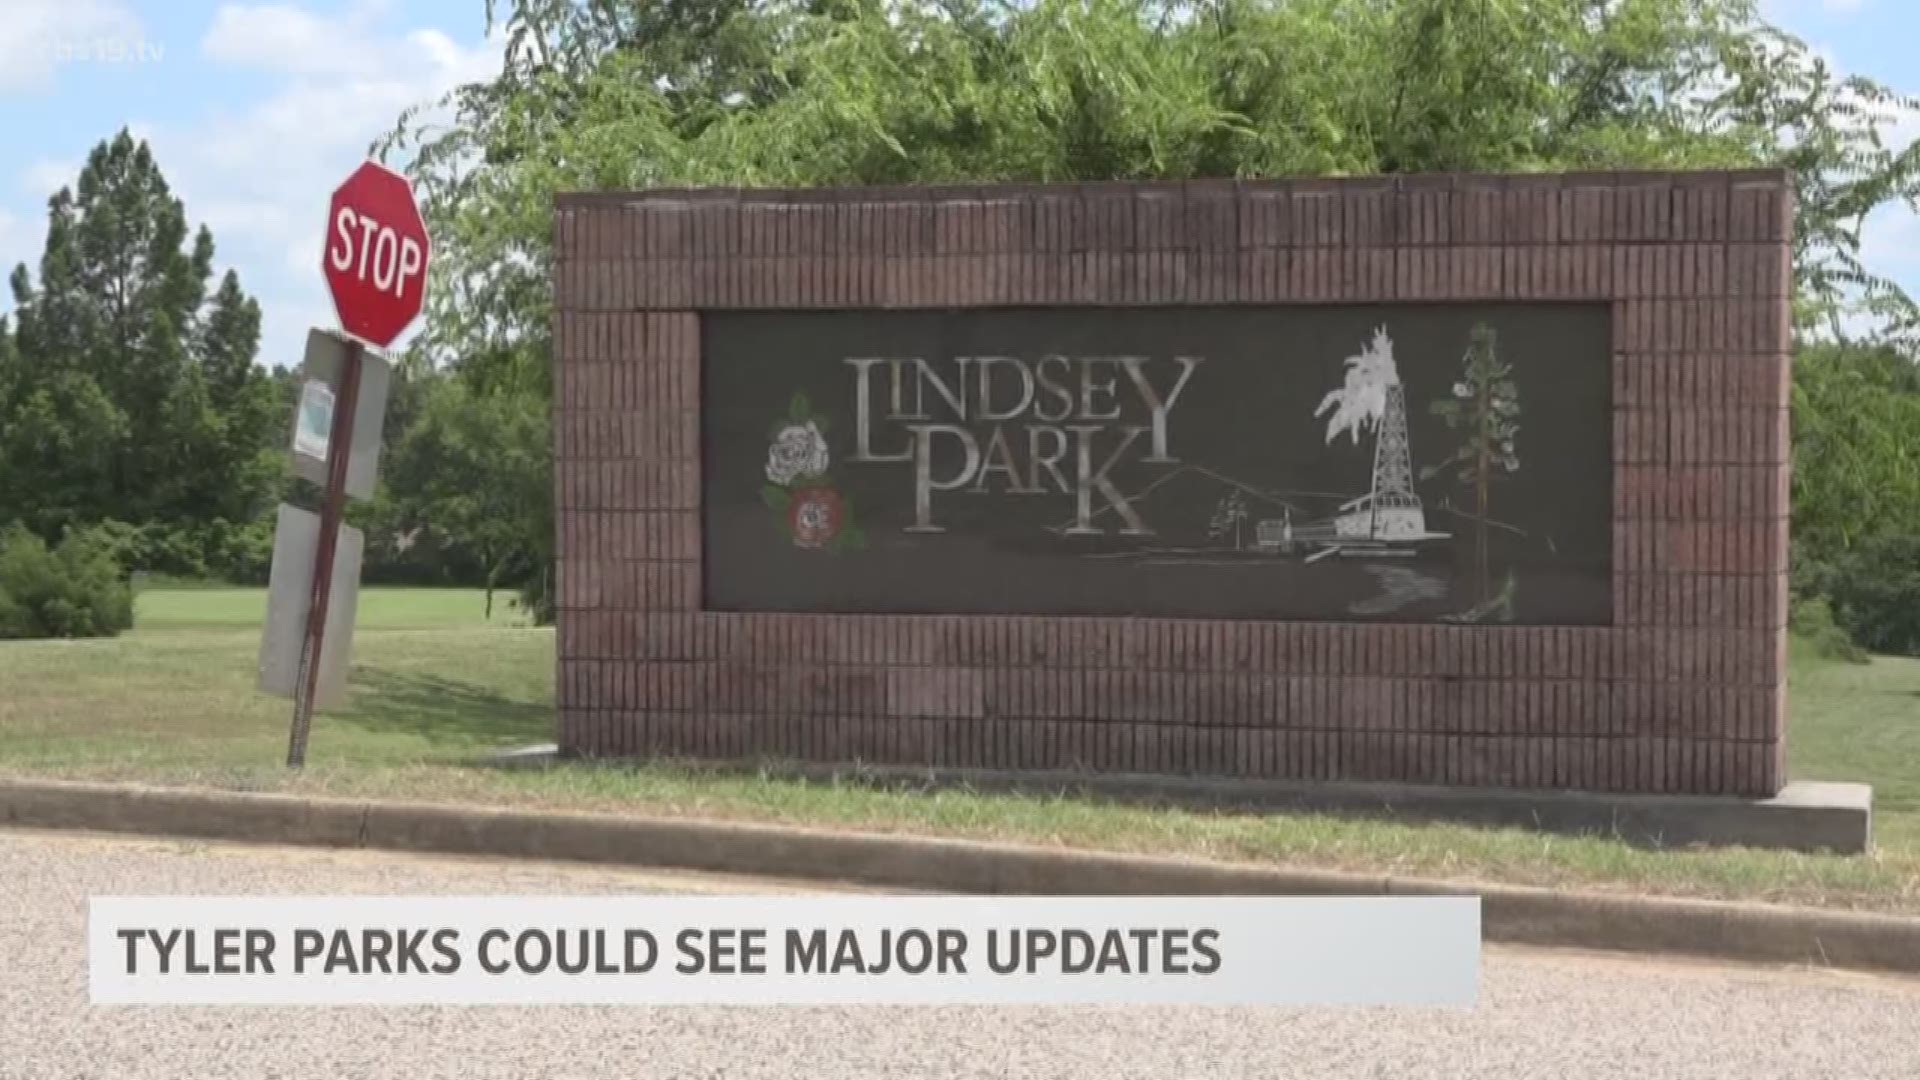 Facilities like Fun Forest Park, Lindsay Park and Woldert Park will see major updates if Tyler City Council passes the proposed Parks and Open Spaces Master Plan.